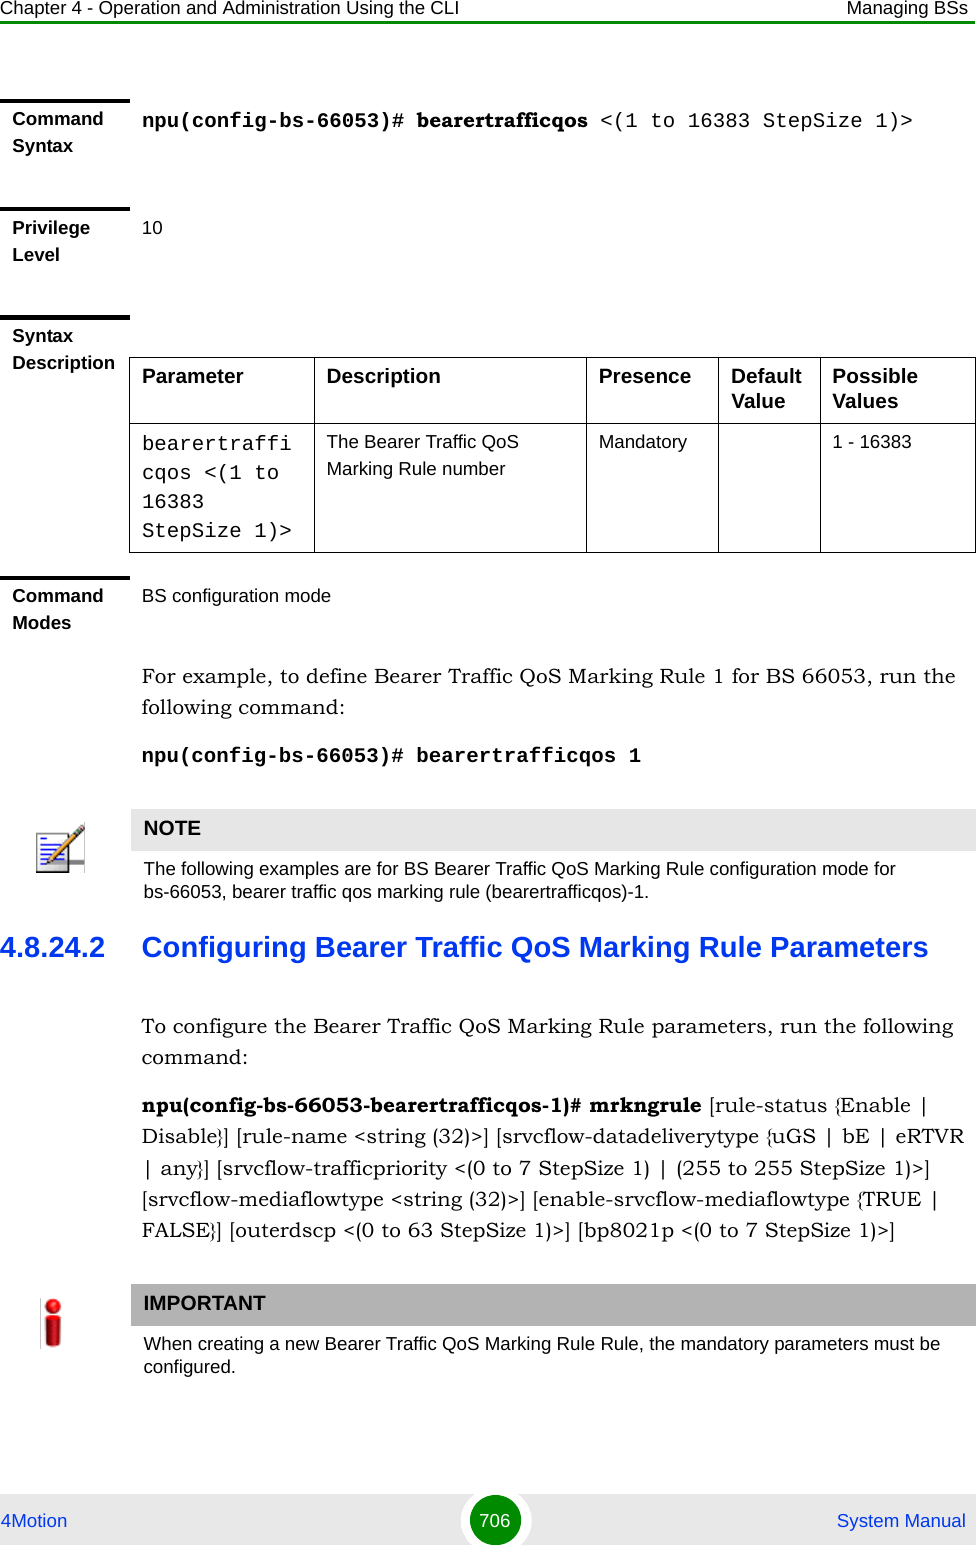 Chapter 4 - Operation and Administration Using the CLI Managing BSs4Motion 706  System ManualFor example, to define Bearer Traffic QoS Marking Rule 1 for BS 66053, run the following command:npu(config-bs-66053)# bearertrafficqos 14.8.24.2 Configuring Bearer Traffic QoS Marking Rule ParametersTo configure the Bearer Traffic QoS Marking Rule parameters, run the following command:npu(config-bs-66053-bearertrafficqos-1)# mrkngrule [rule-status {Enable | Disable}] [rule-name &lt;string (32)&gt;] [srvcflow-datadeliverytype {uGS | bE | eRTVR | any}] [srvcflow-trafficpriority &lt;(0 to 7 StepSize 1) | (255 to 255 StepSize 1)&gt;] [srvcflow-mediaflowtype &lt;string (32)&gt;] [enable-srvcflow-mediaflowtype {TRUE | FALSE}] [outerdscp &lt;(0 to 63 StepSize 1)&gt;] [bp8021p &lt;(0 to 7 StepSize 1)&gt;]Command Syntaxnpu(config-bs-66053)# bearertrafficqos &lt;(1 to 16383 StepSize 1)&gt;Privilege Level10Syntax Description Parameter Description Presence Default Value Possible Valuesbearertrafficqos &lt;(1 to 16383 StepSize 1)&gt;The Bearer Traffic QoS Marking Rule numberMandatory 1 - 16383Command ModesBS configuration modeNOTEThe following examples are for BS Bearer Traffic QoS Marking Rule configuration mode for bs-66053, bearer traffic qos marking rule (bearertrafficqos)-1.IMPORTANTWhen creating a new Bearer Traffic QoS Marking Rule Rule, the mandatory parameters must be configured.